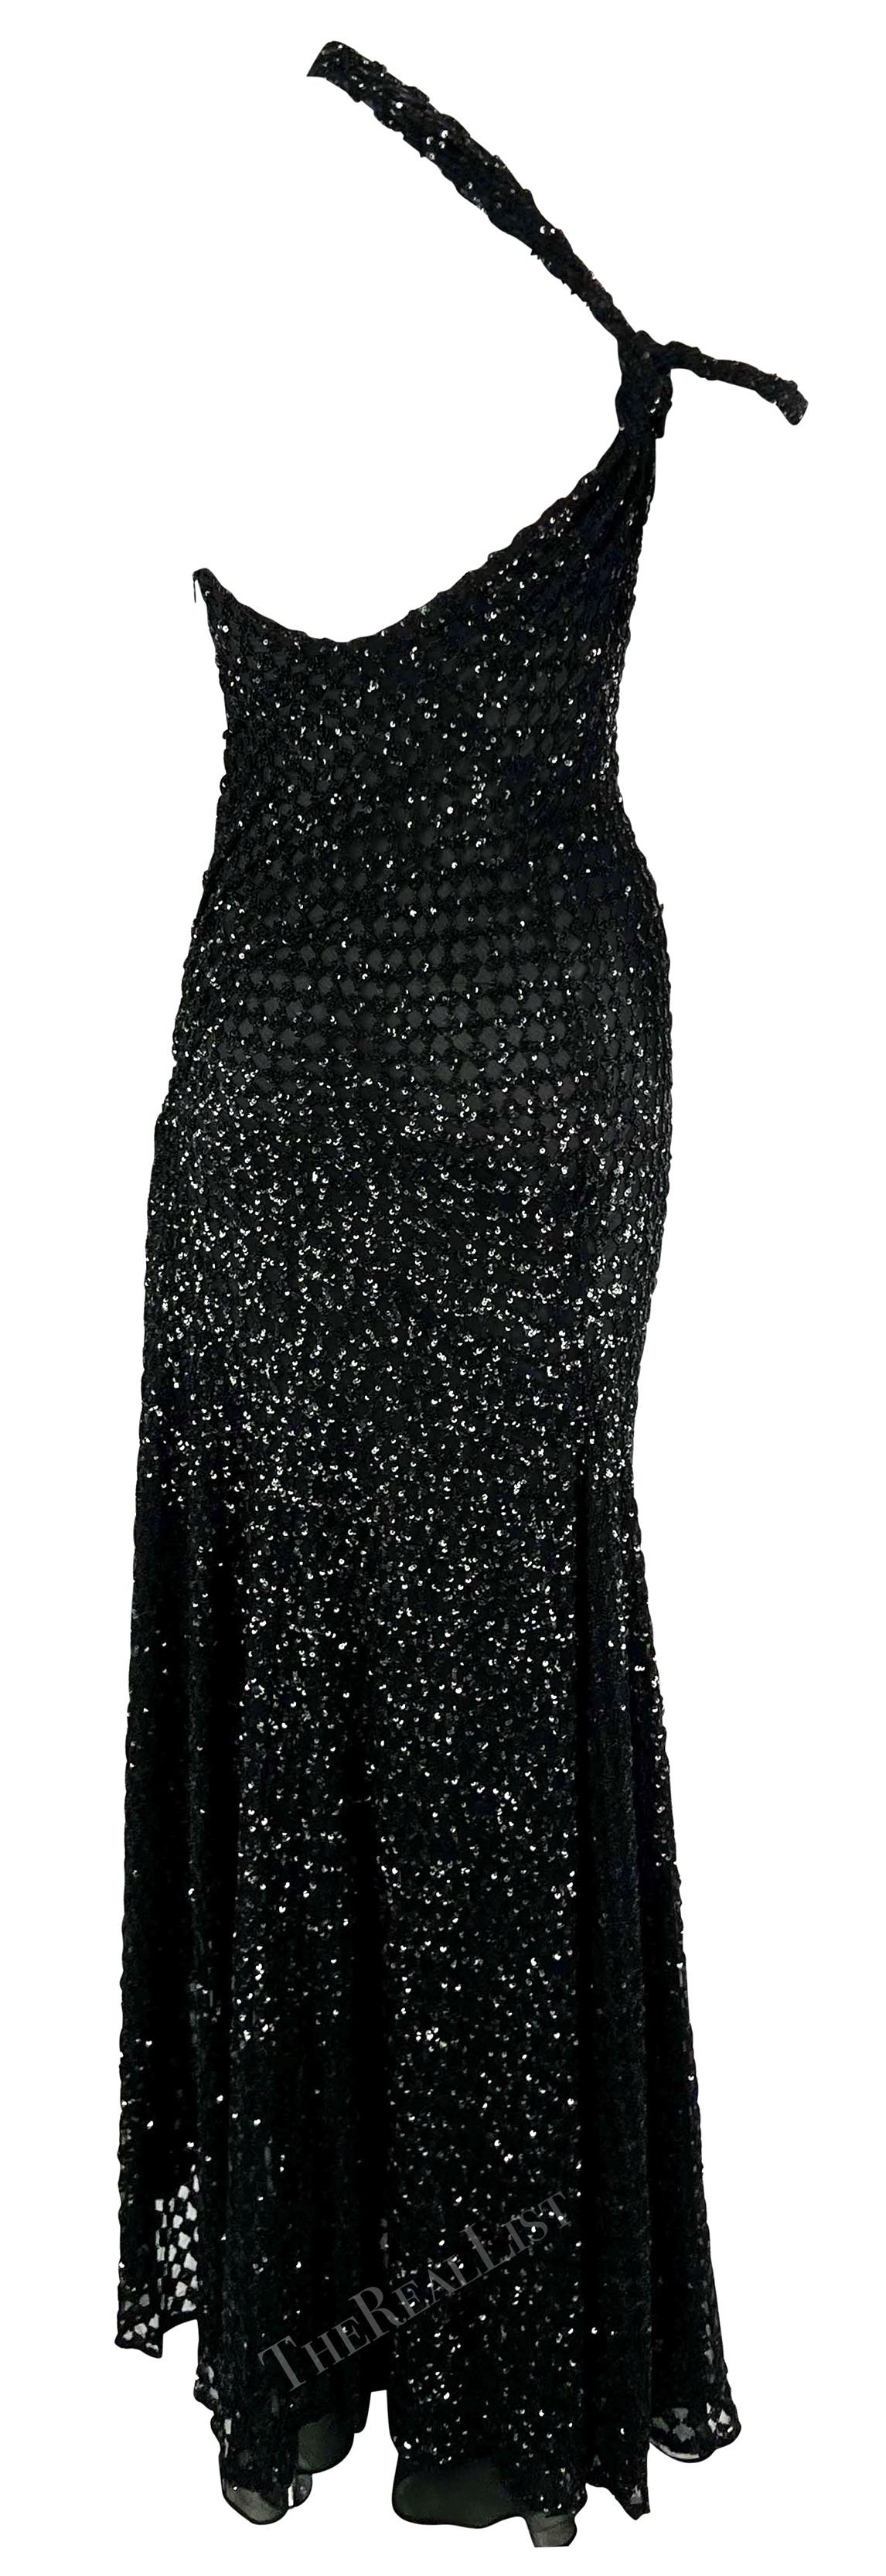 F/W 2002 Gianni Versace by Donatella Runway Ad Black Sequin Sheer Slit Gown  For Sale 4